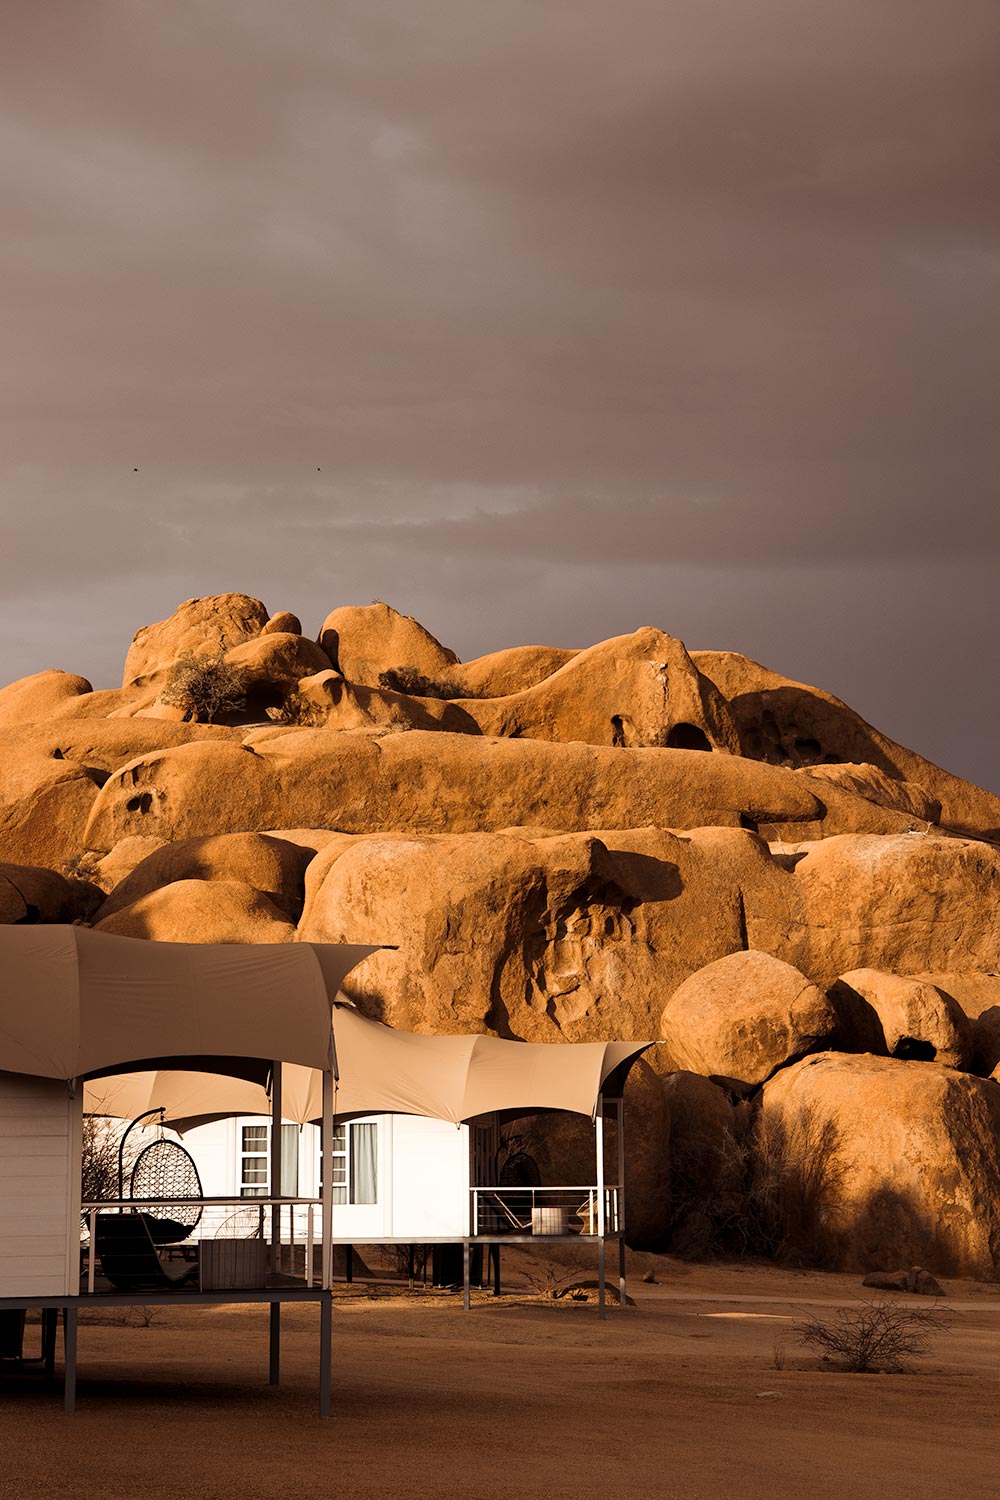 The boho chic clamping accommodations among the golden lit boulders of Spitzkoppe Mountain